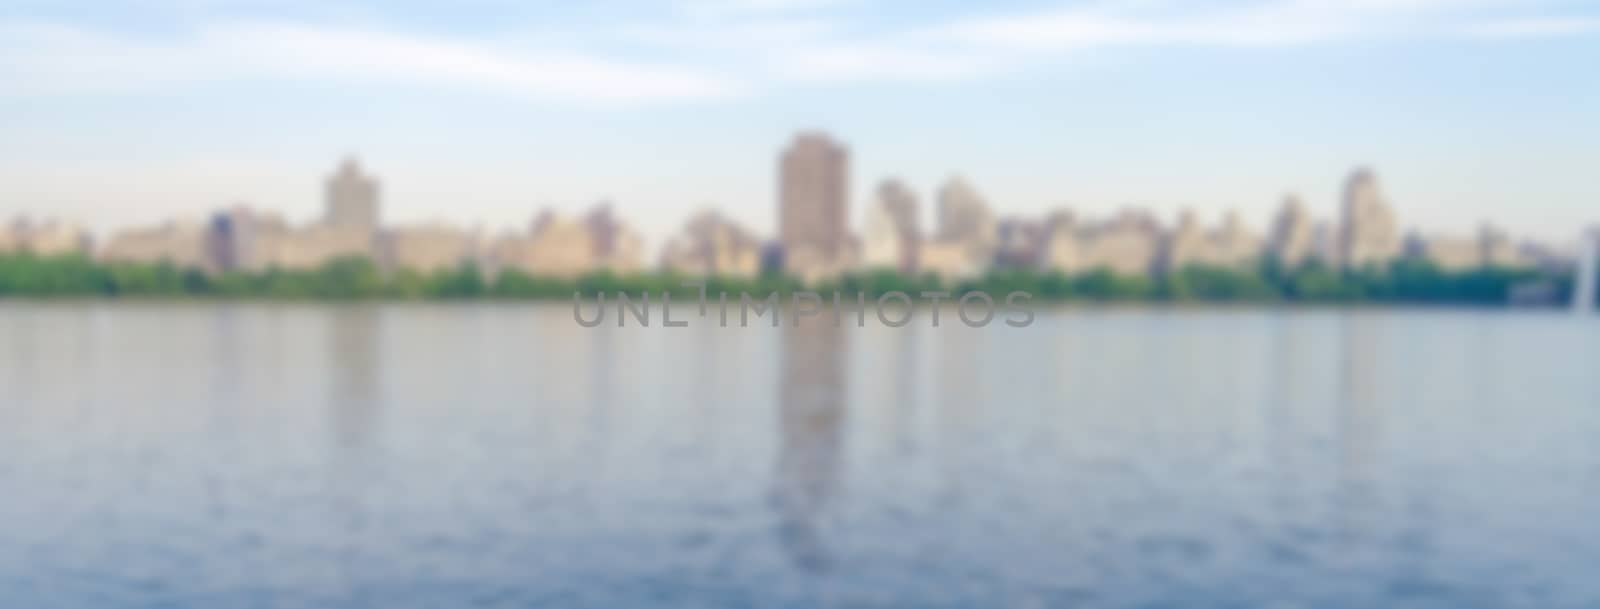 Defocused background with Reservoir in Central Park, New York City. Intentionally blurred post production for bokeh effect